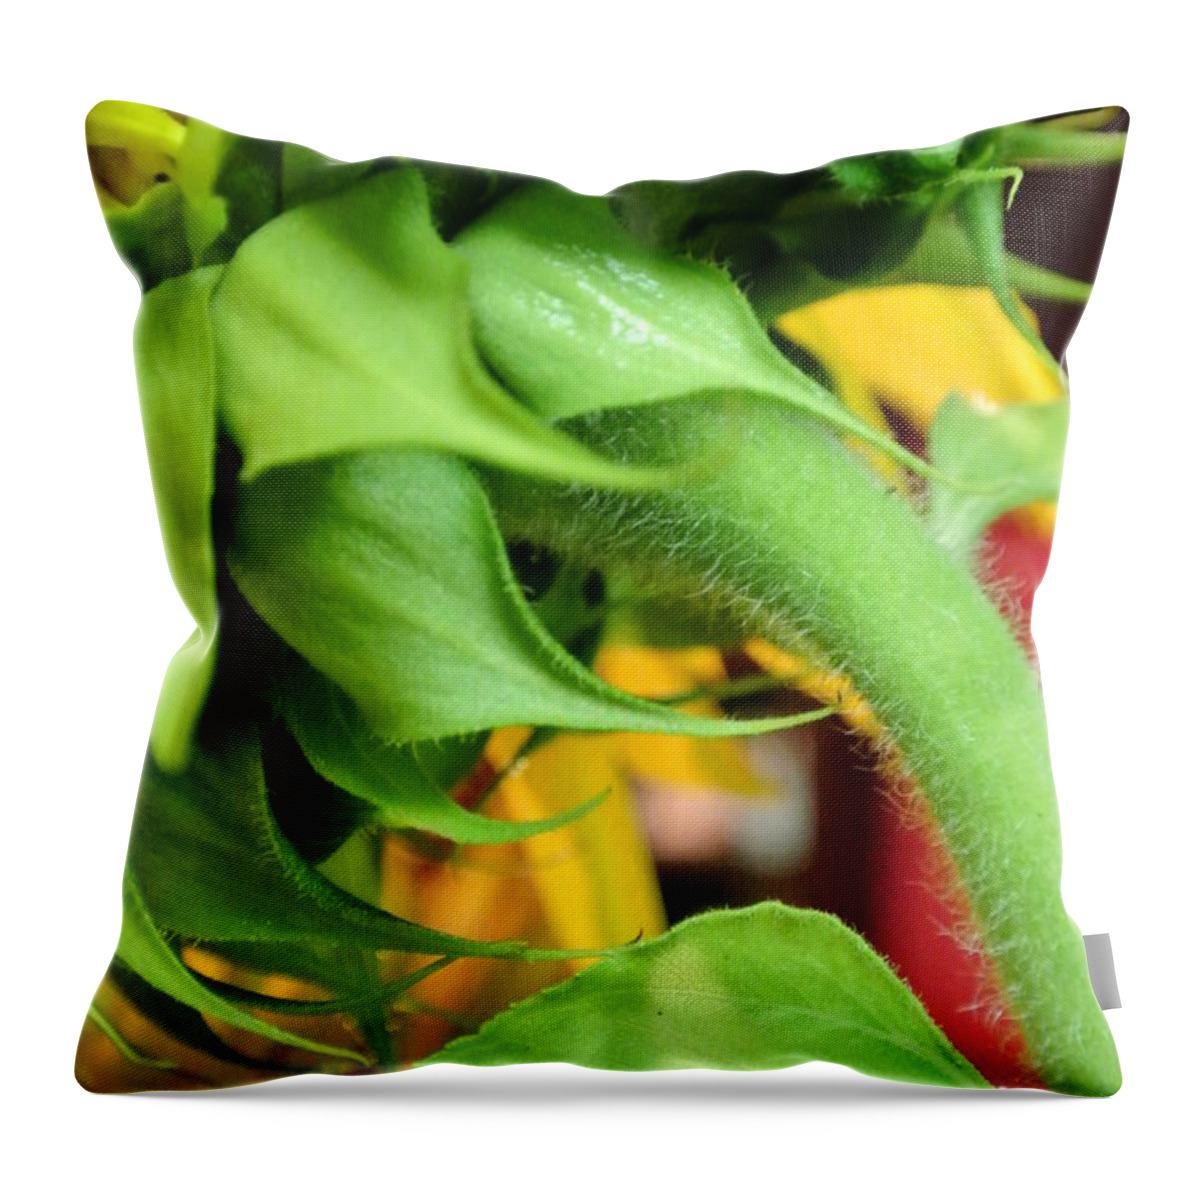  Throw Pillow featuring the photograph Sunflower - The Back Side by Sharron Cuthbertson